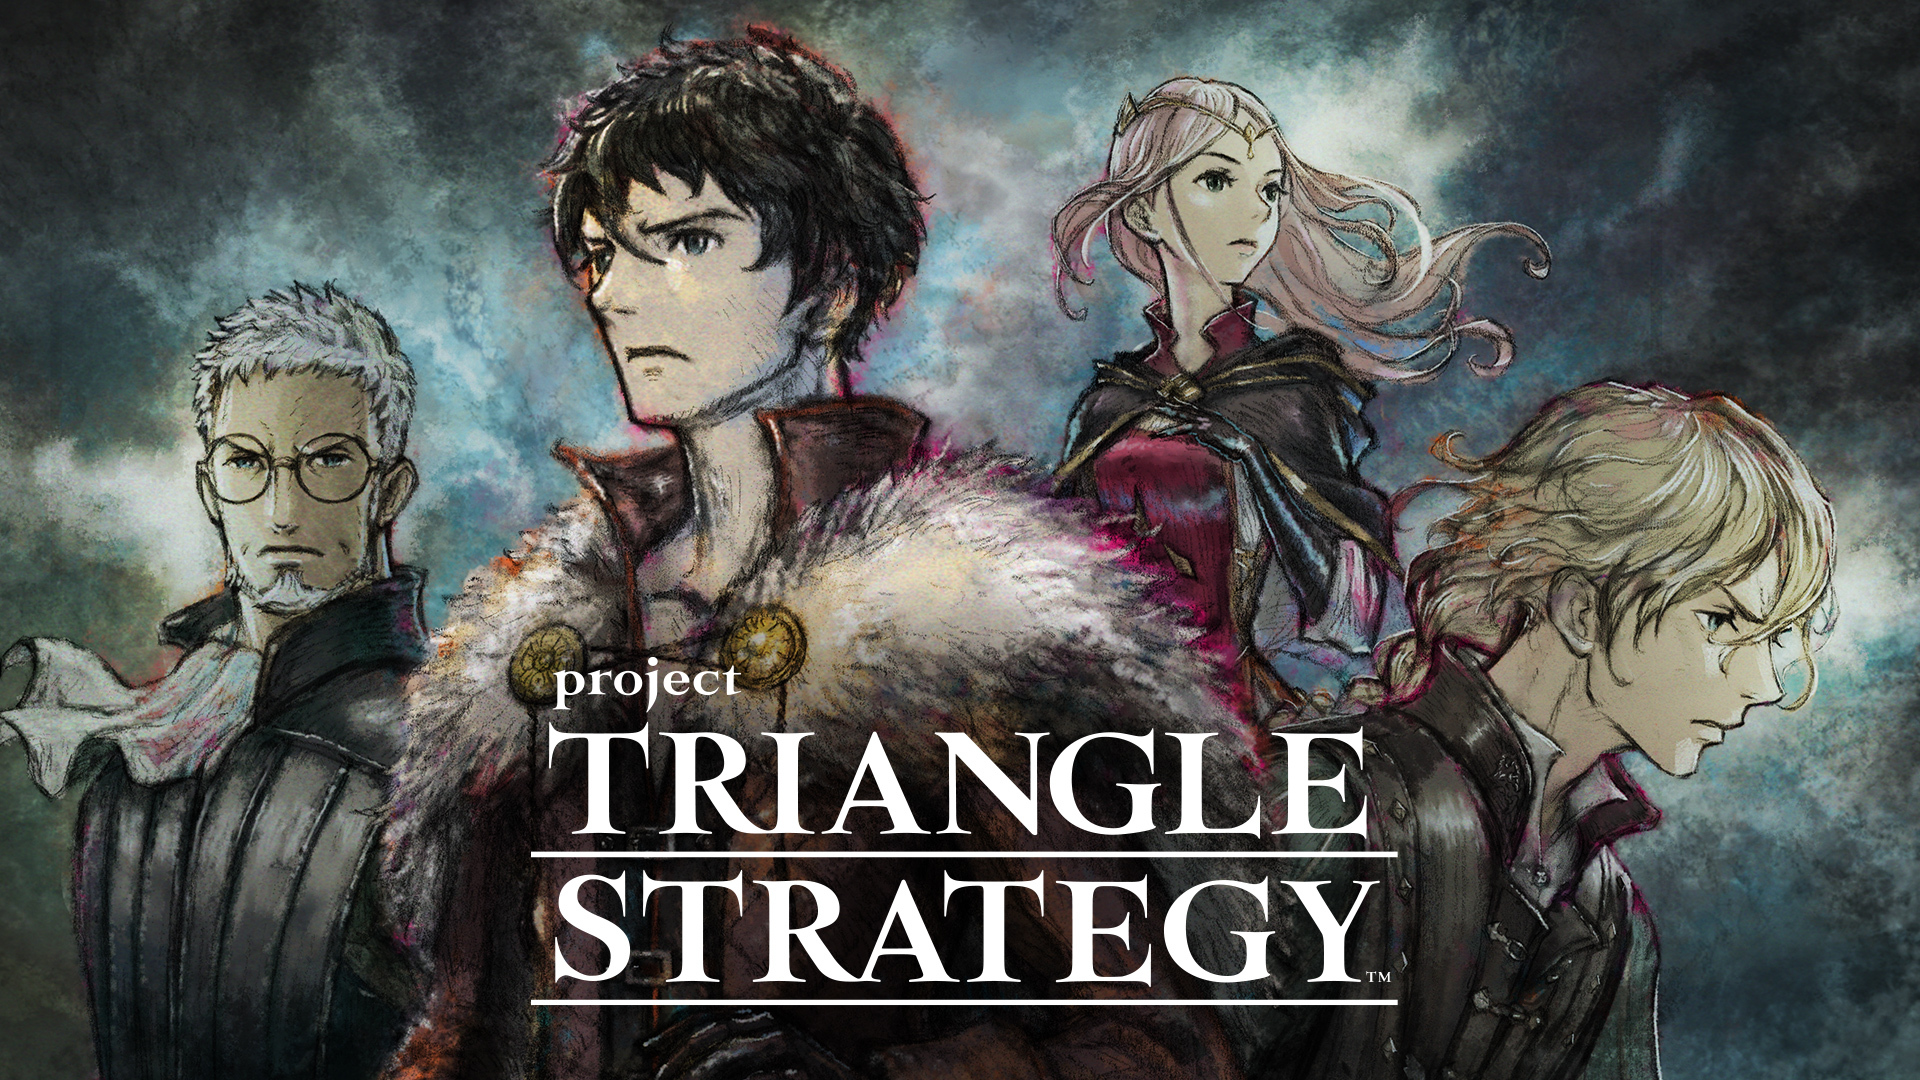 Project Triangle Strategy Debut Demo